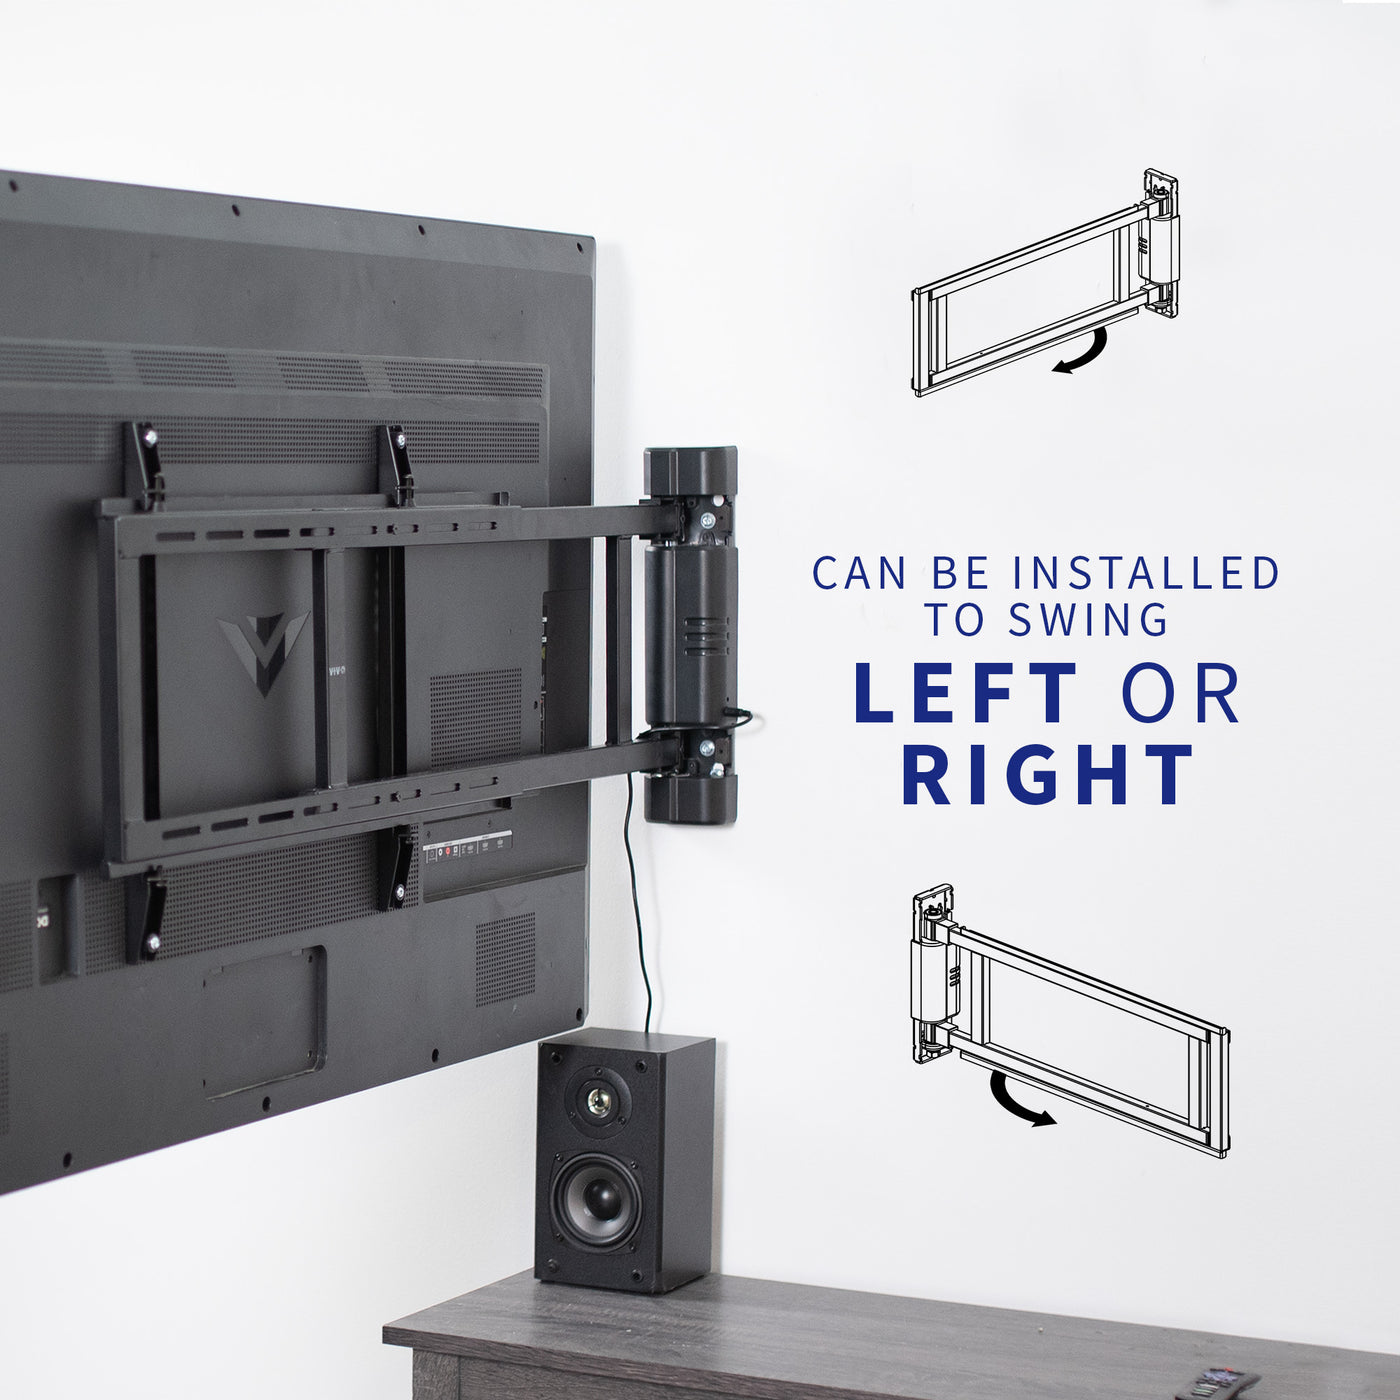 Left or right swing motion can conveniently move the screen.